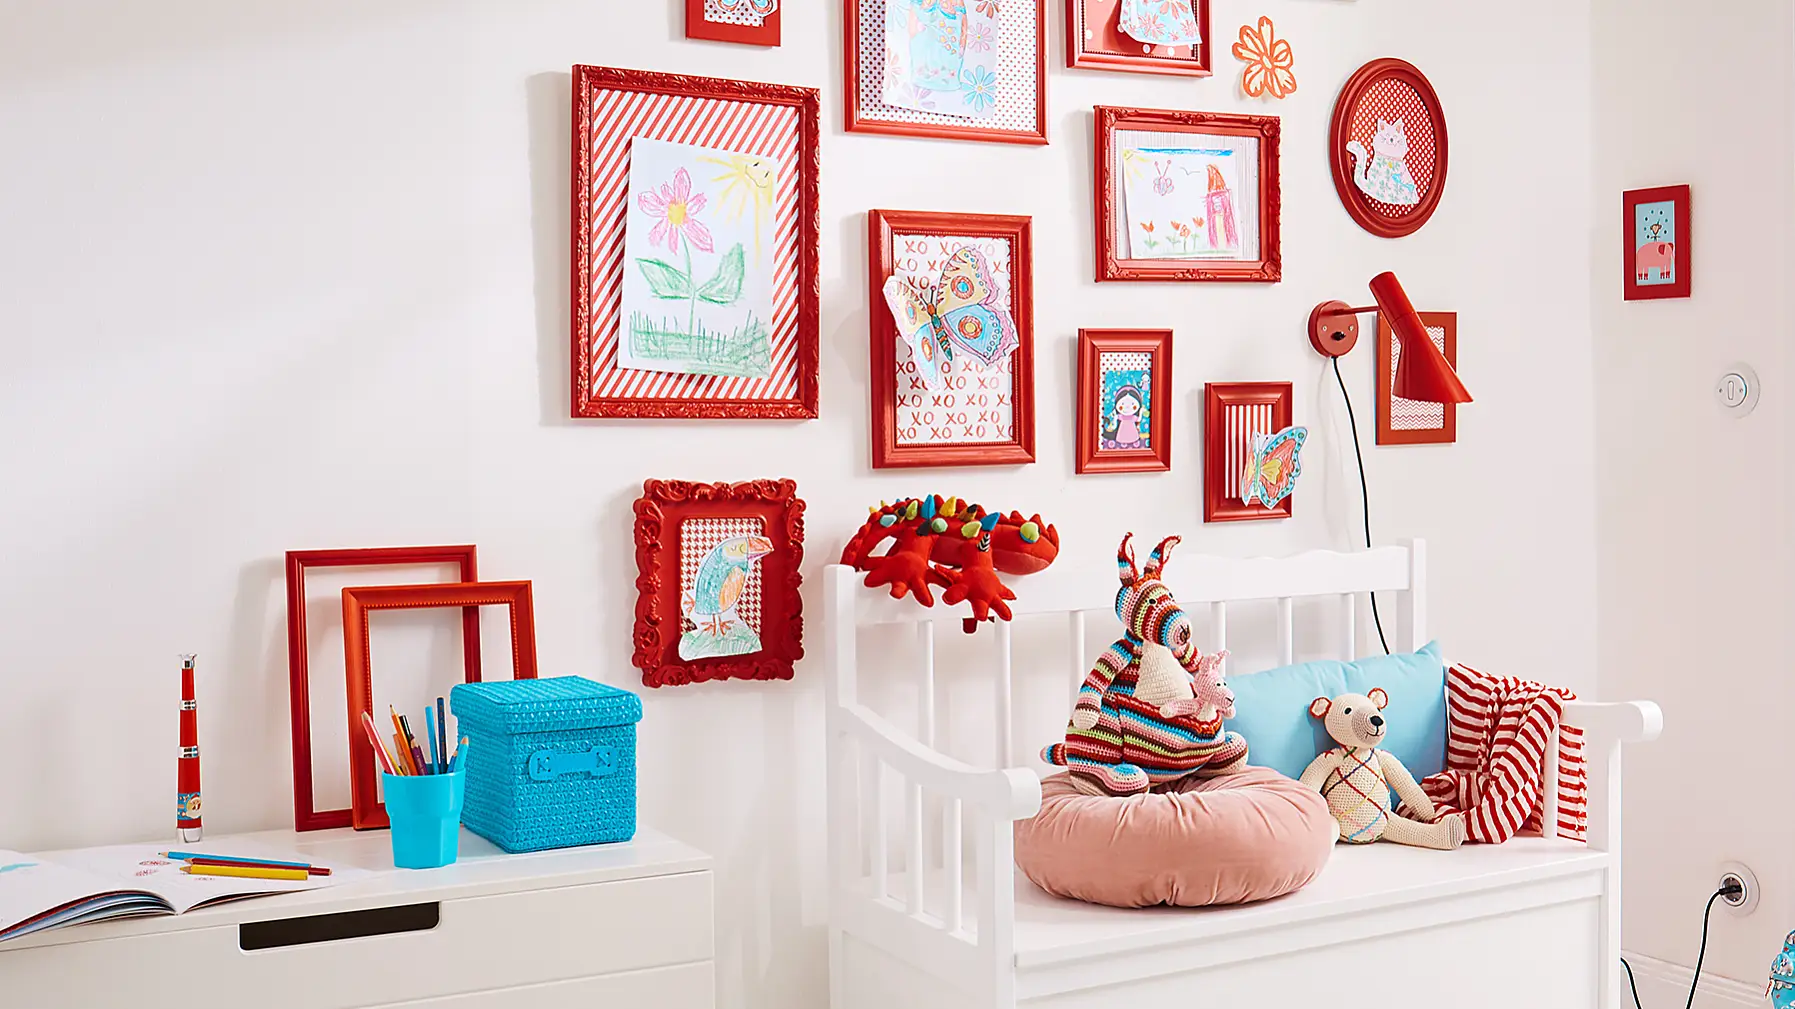 Wall Art for children using a colorful gallery